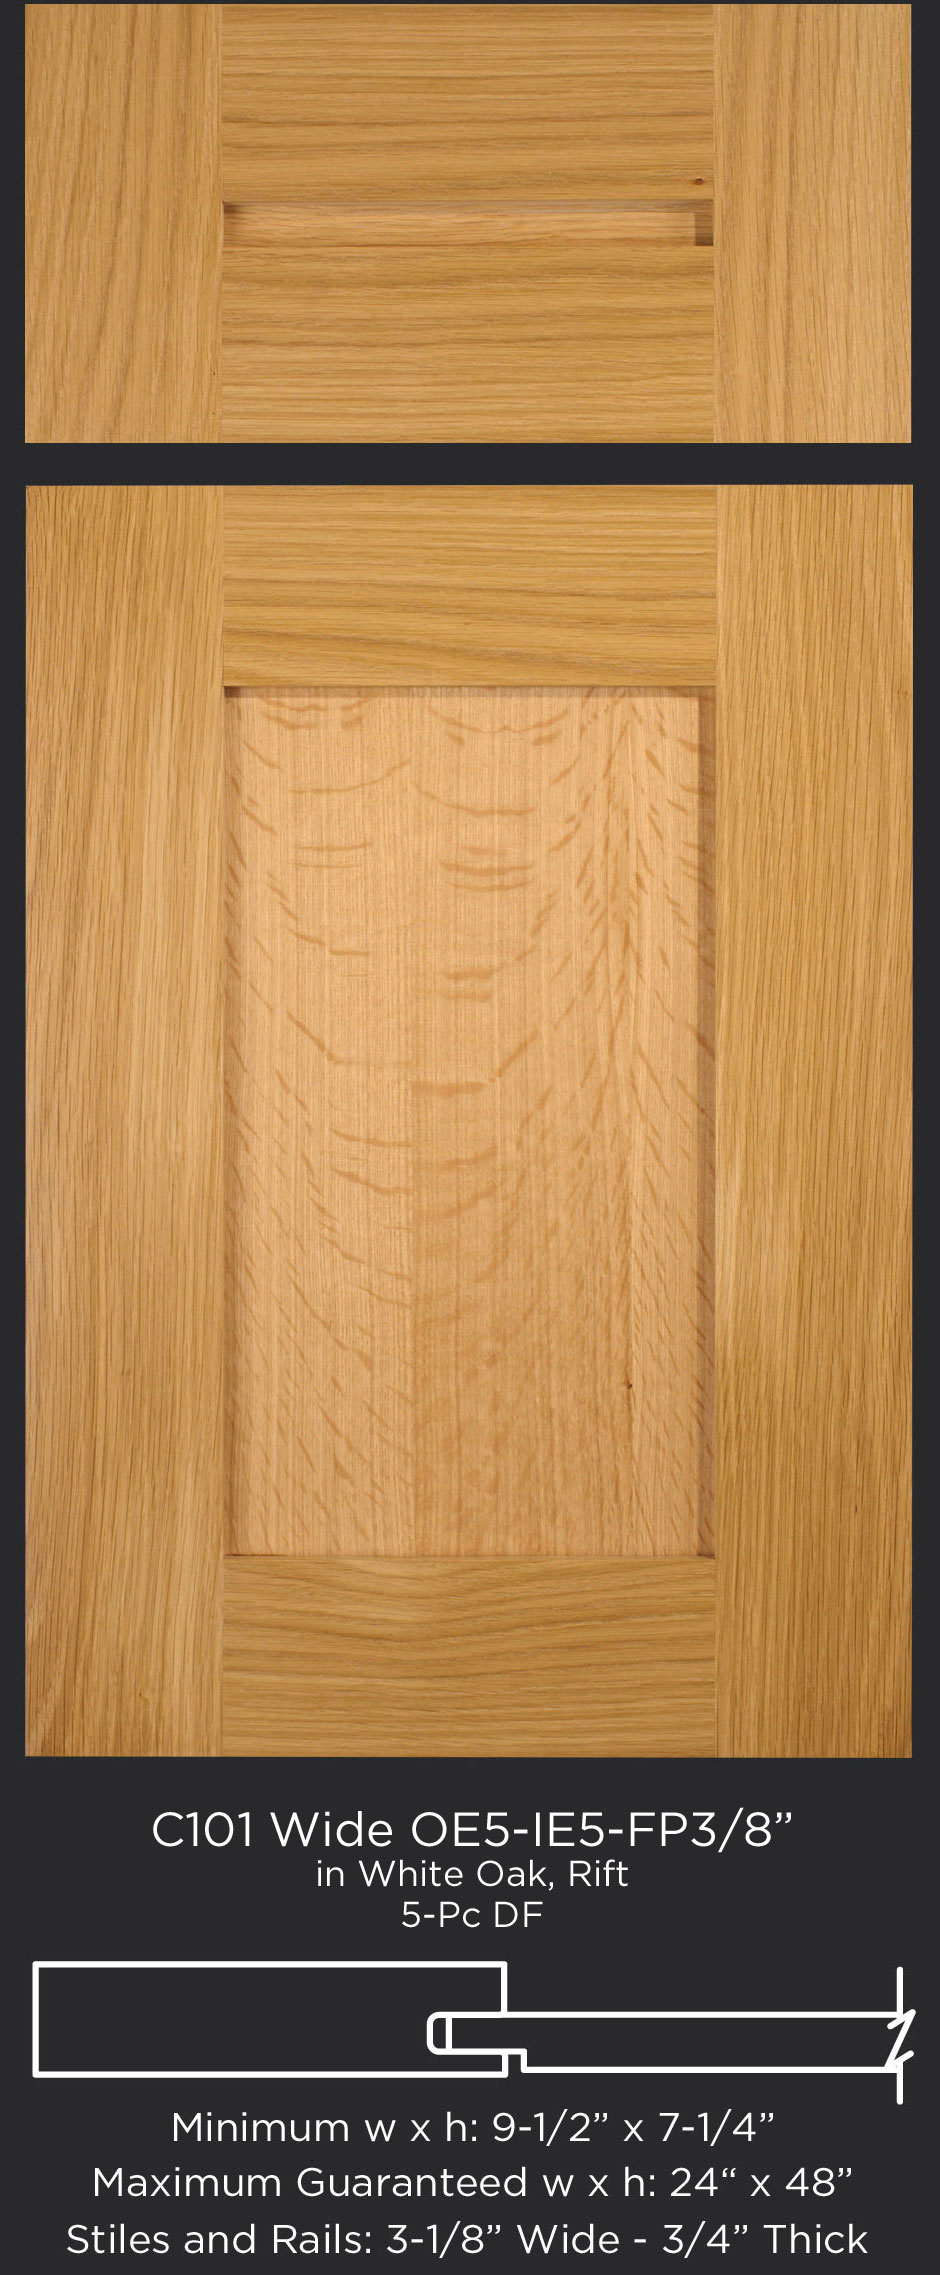 Cope and Stick Cabinet Door C101 Wide OE5-IE5-FP3/8 White Oak, Rift and 5-piece drawer front